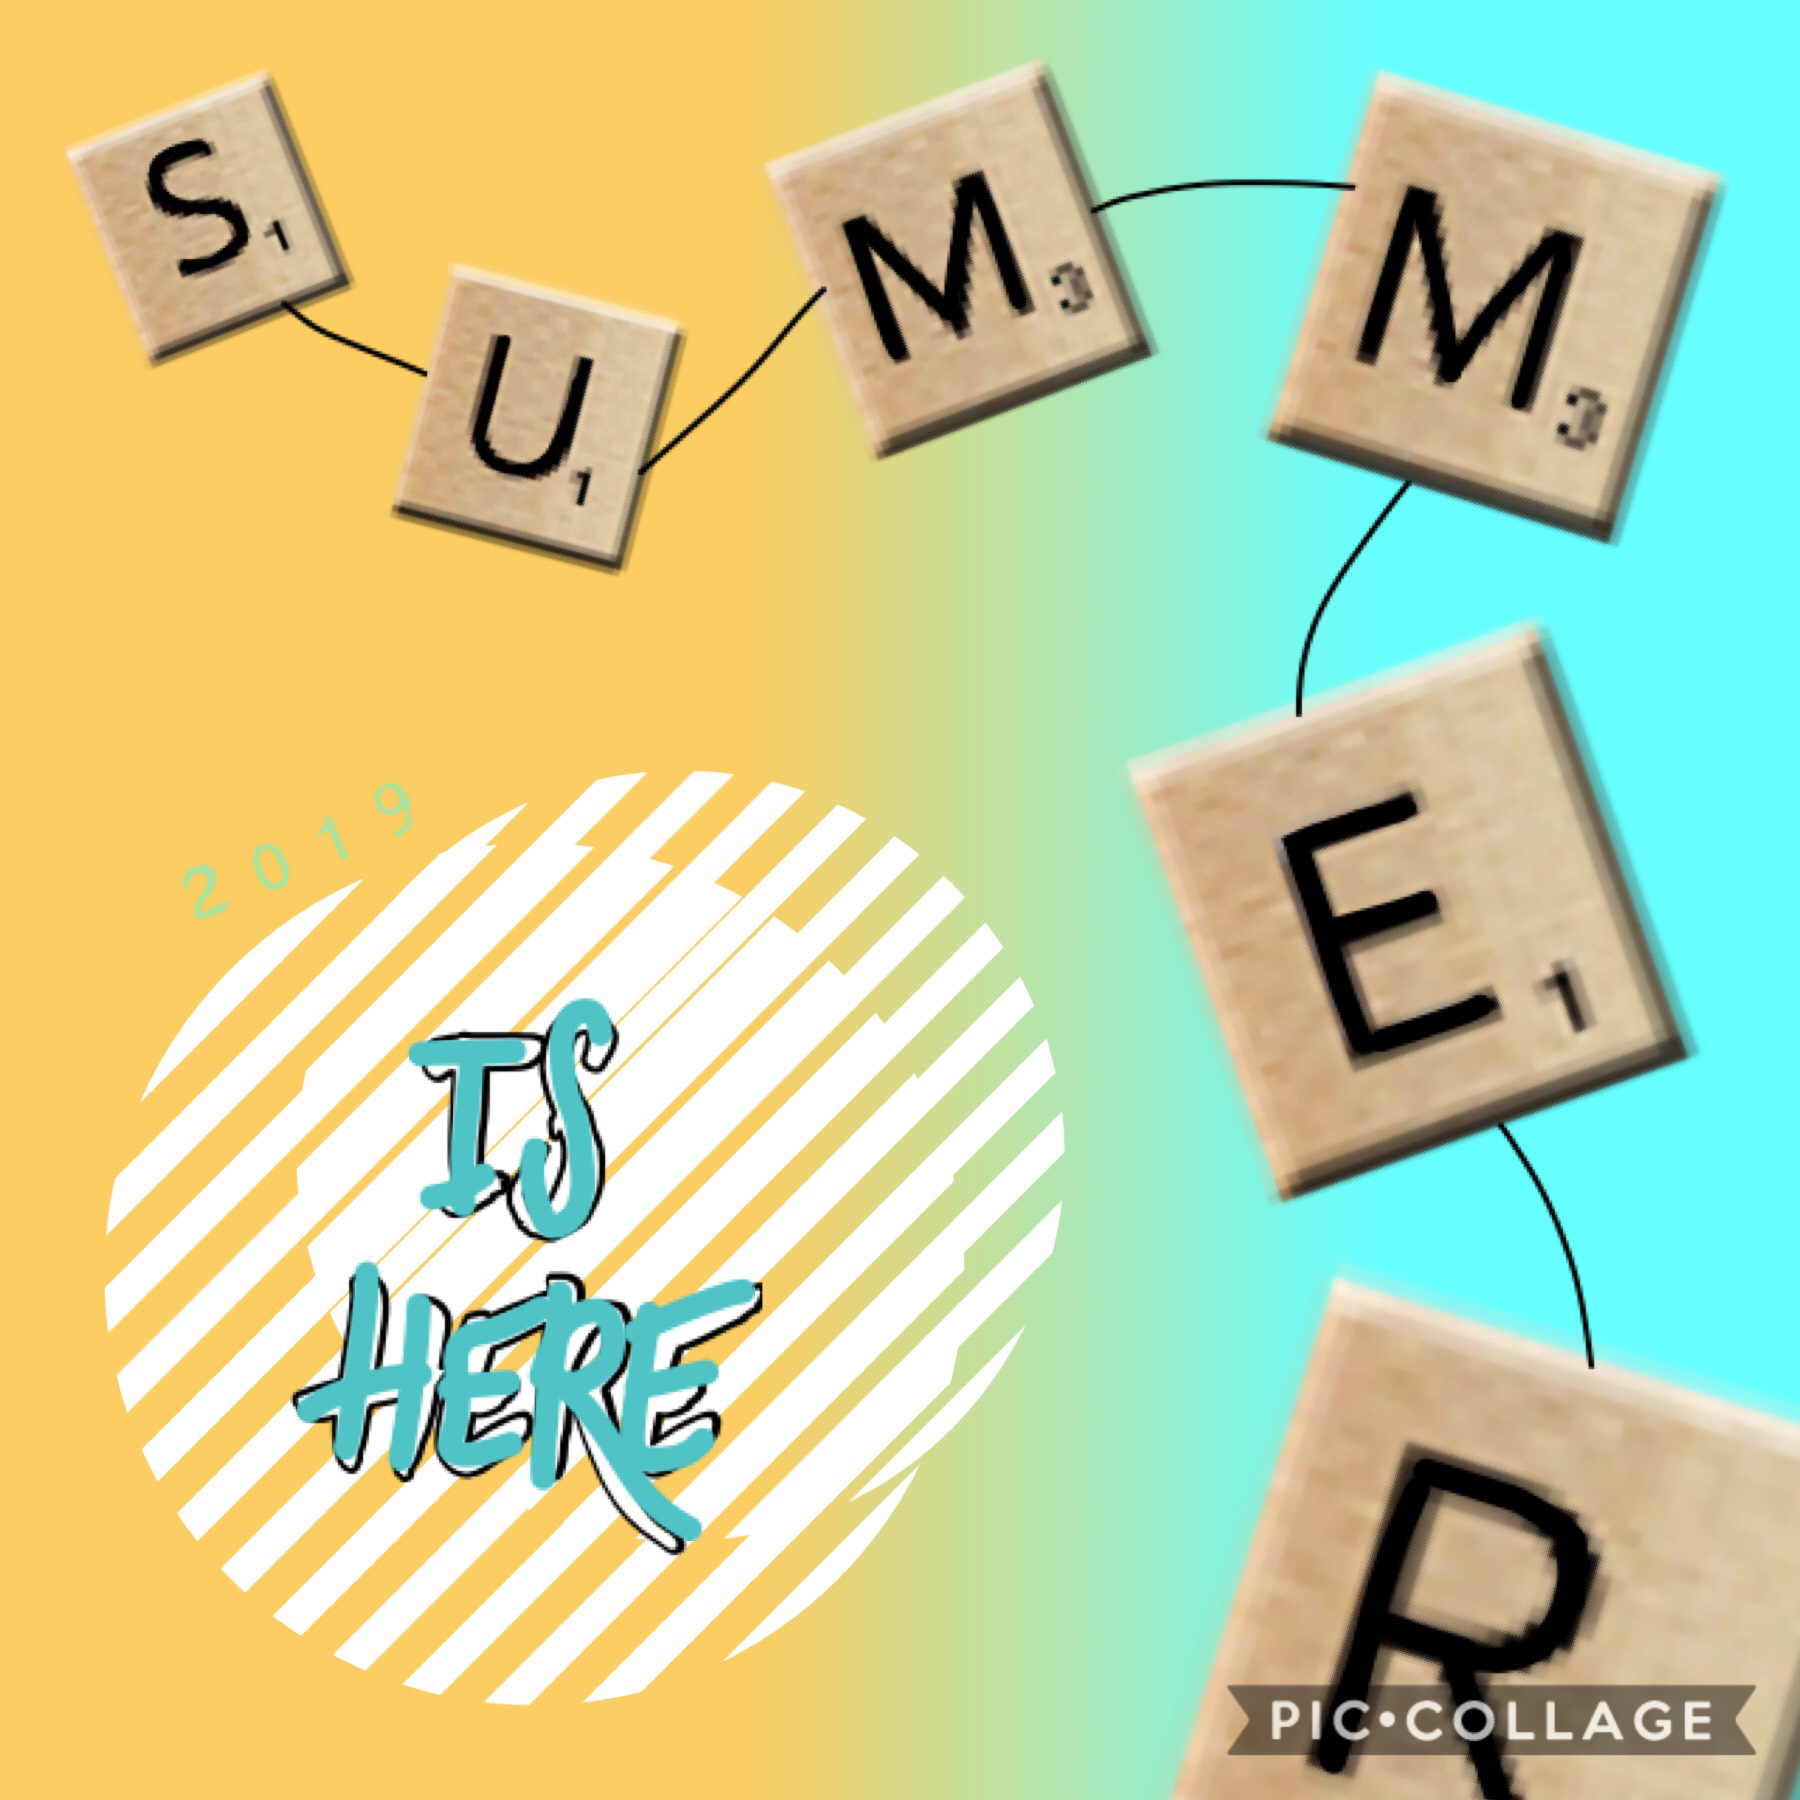 Happy first day of summer! 😎 2️⃣0️⃣1️⃣9️⃣ 🏝 🎆 🌞 🐚 💦 🎢 💚 🗓 🍦 🧳 I can’t wait for fall tbh, I hate summer. 🕷 😅 🍁 I mean yeah certain stuff is fun, but I can only do things on weekends, and even that is hardly anything, so it’s unfortunate for me. 🤷🏻‍♀️ 